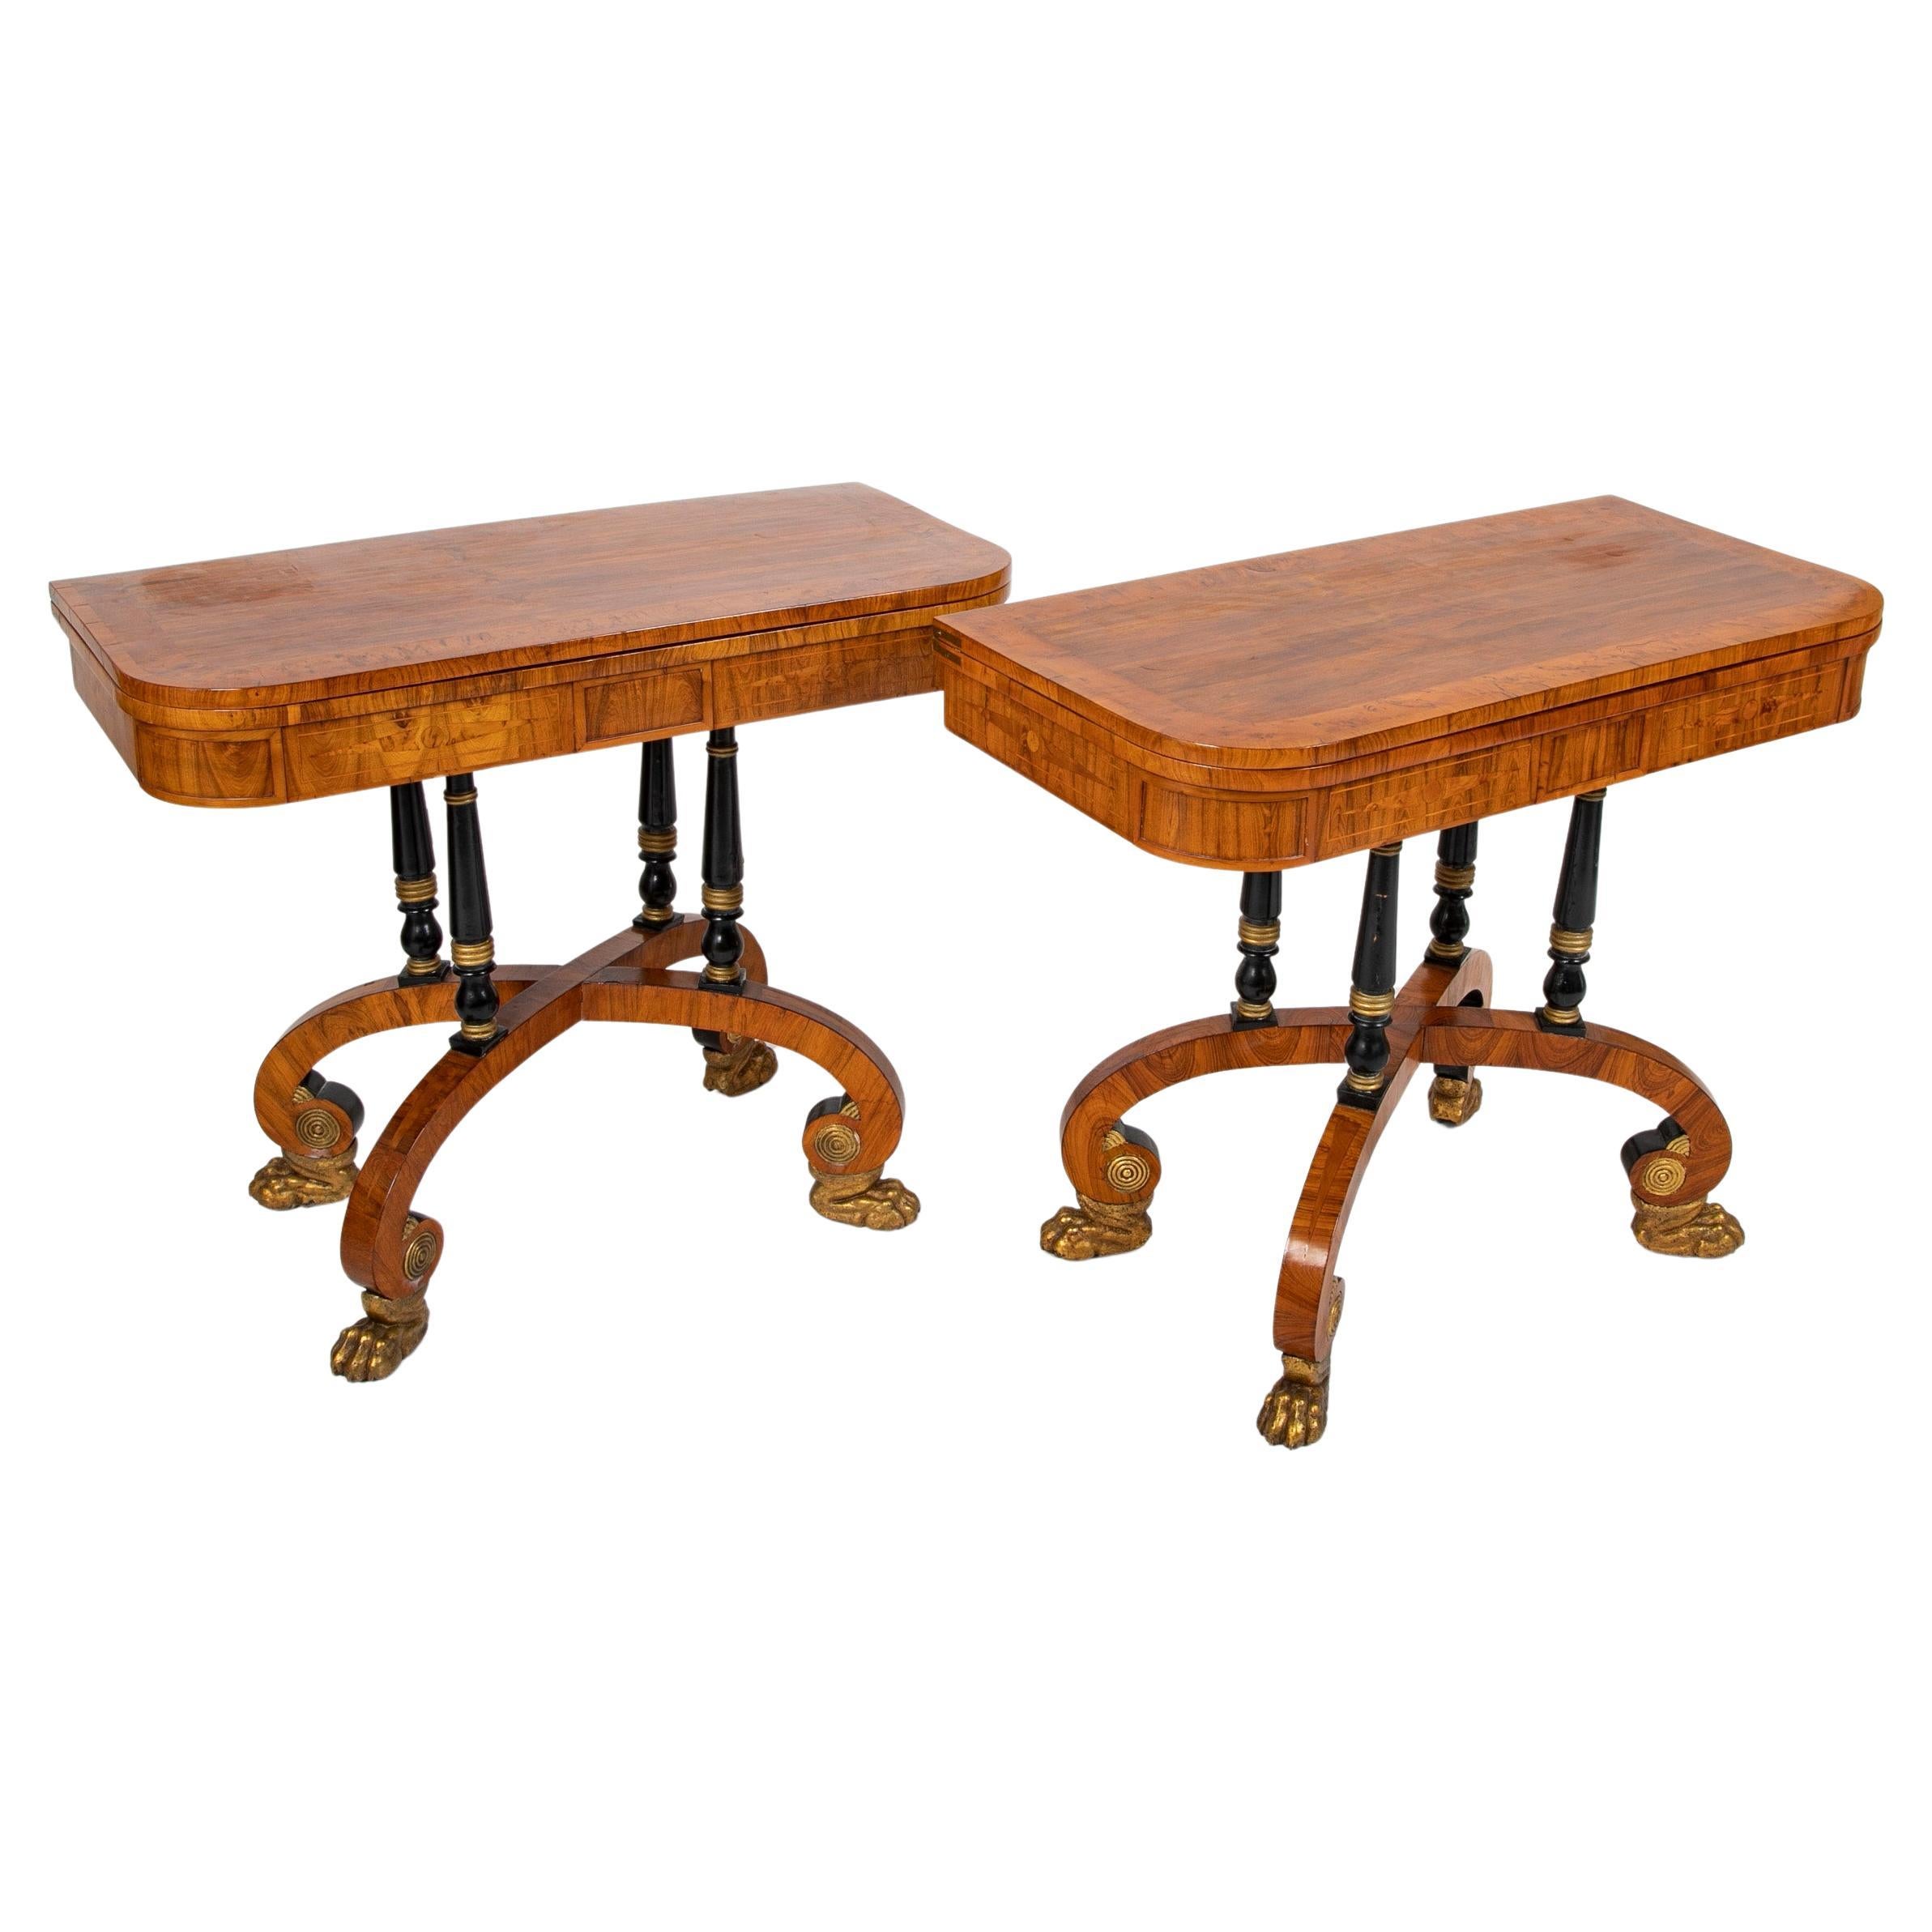 Rare Regency Pair of Games Tables For Sale